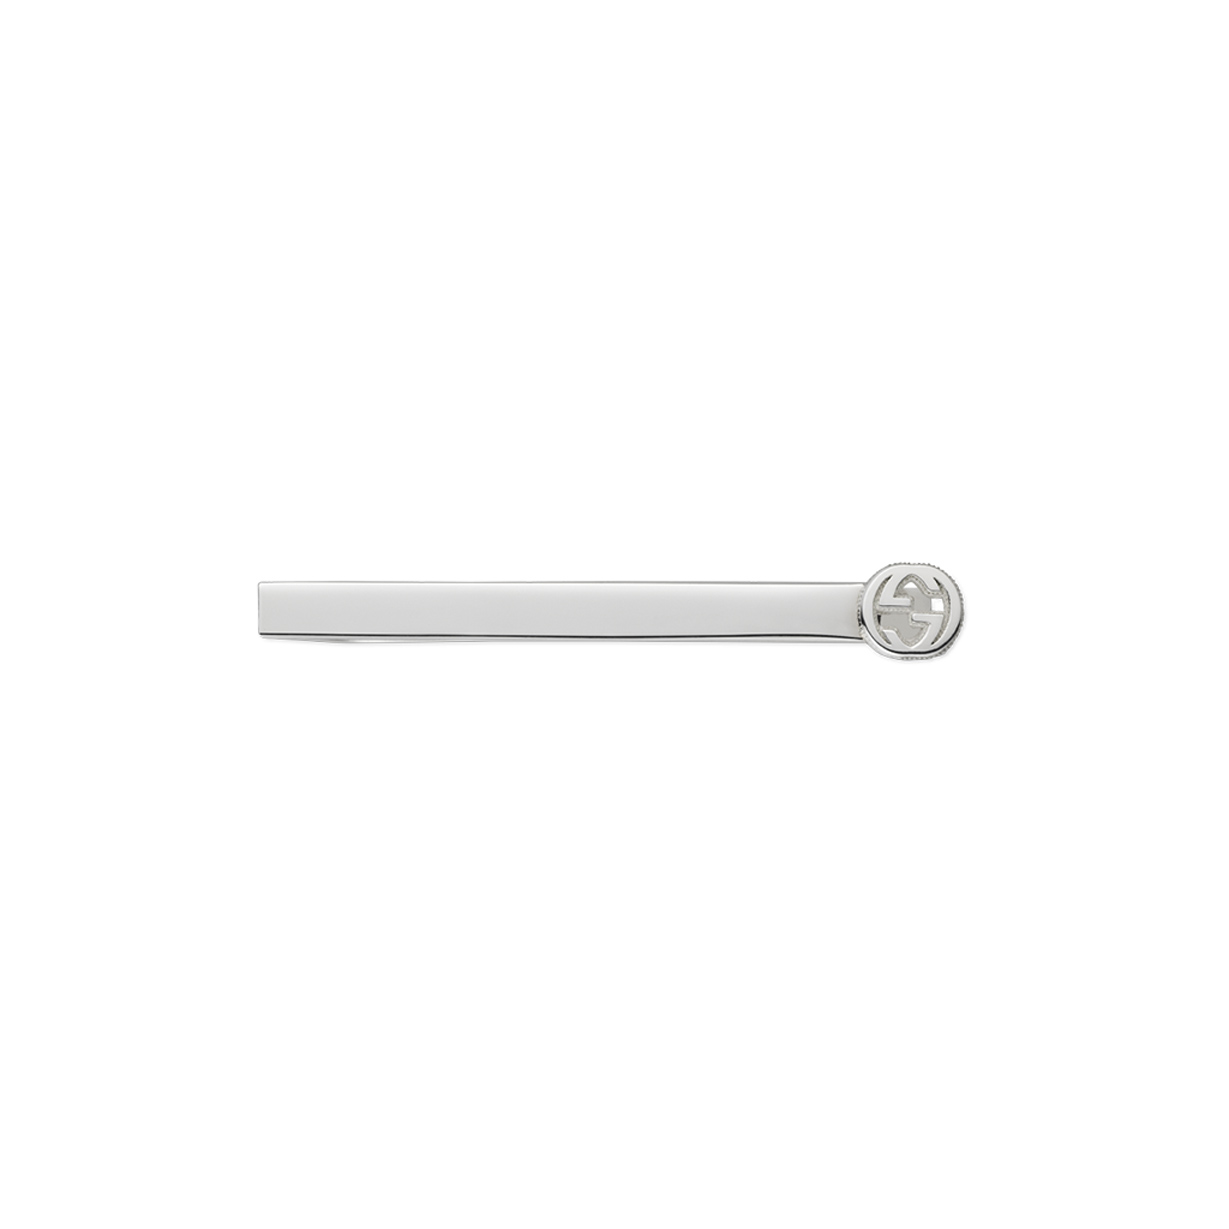 Gucci Tie Bar With Interlocking G Motif in Sterling Silver